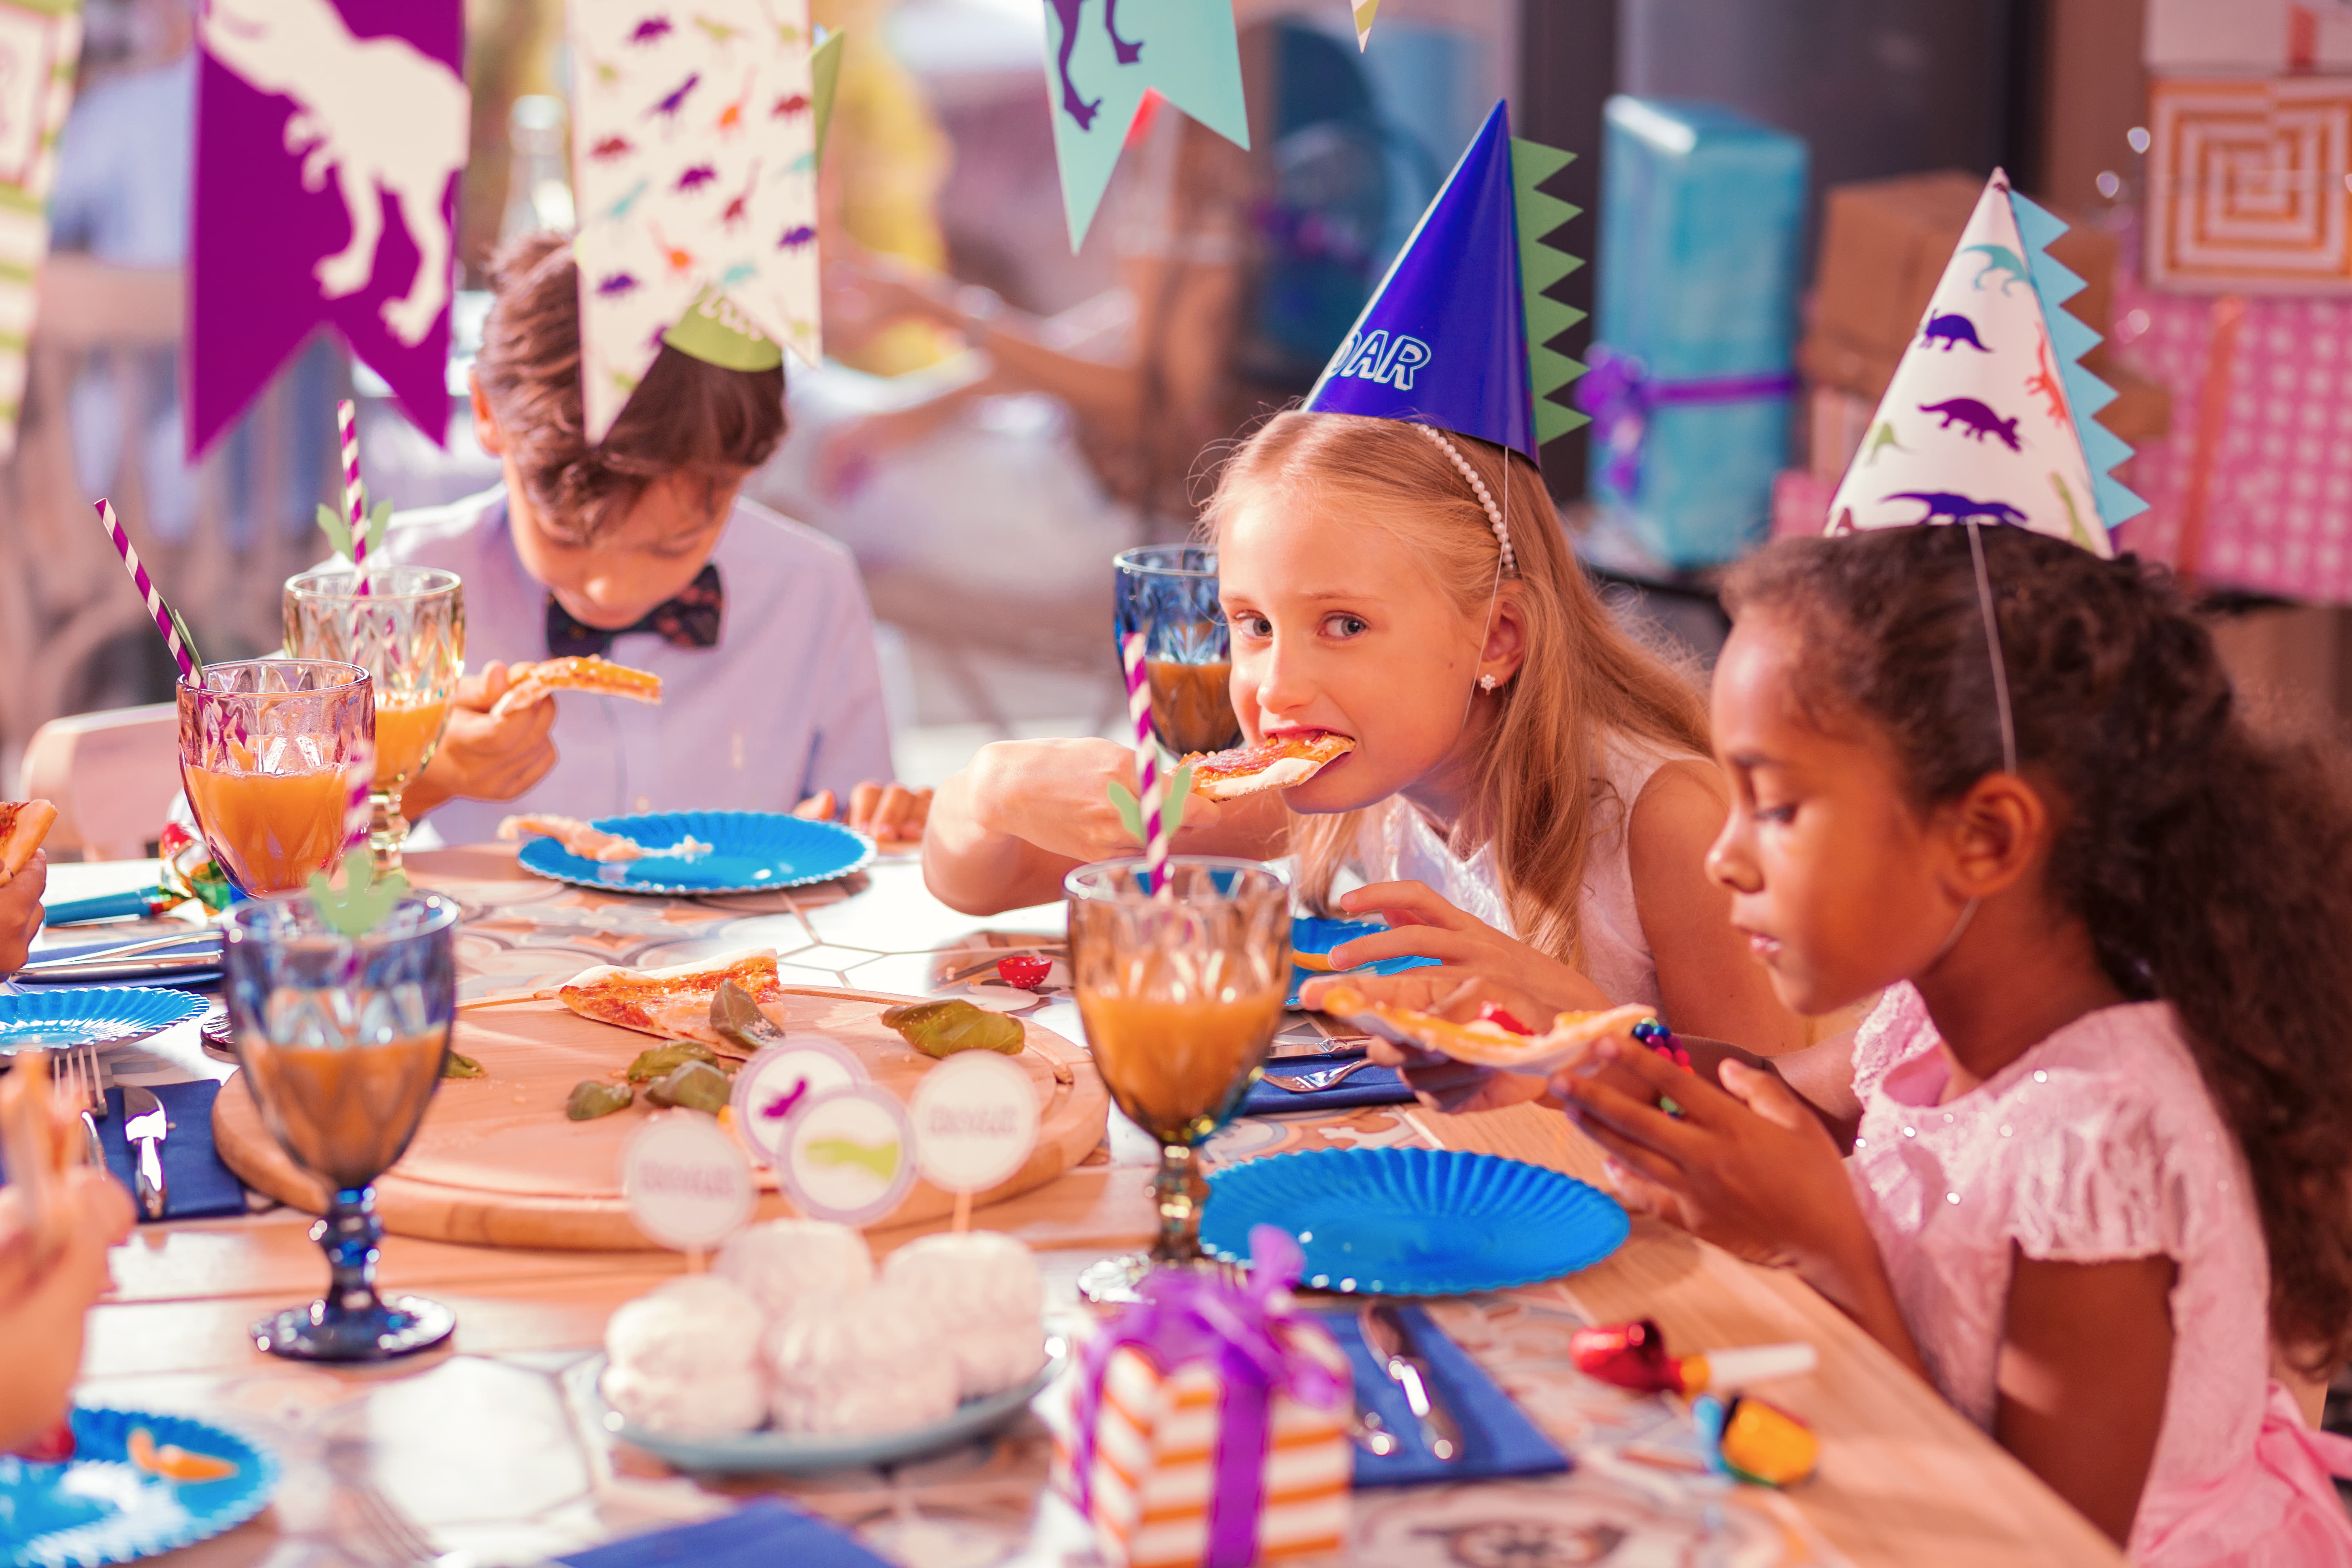 Questions to Ask Before Hiring a Kids' Party Planner